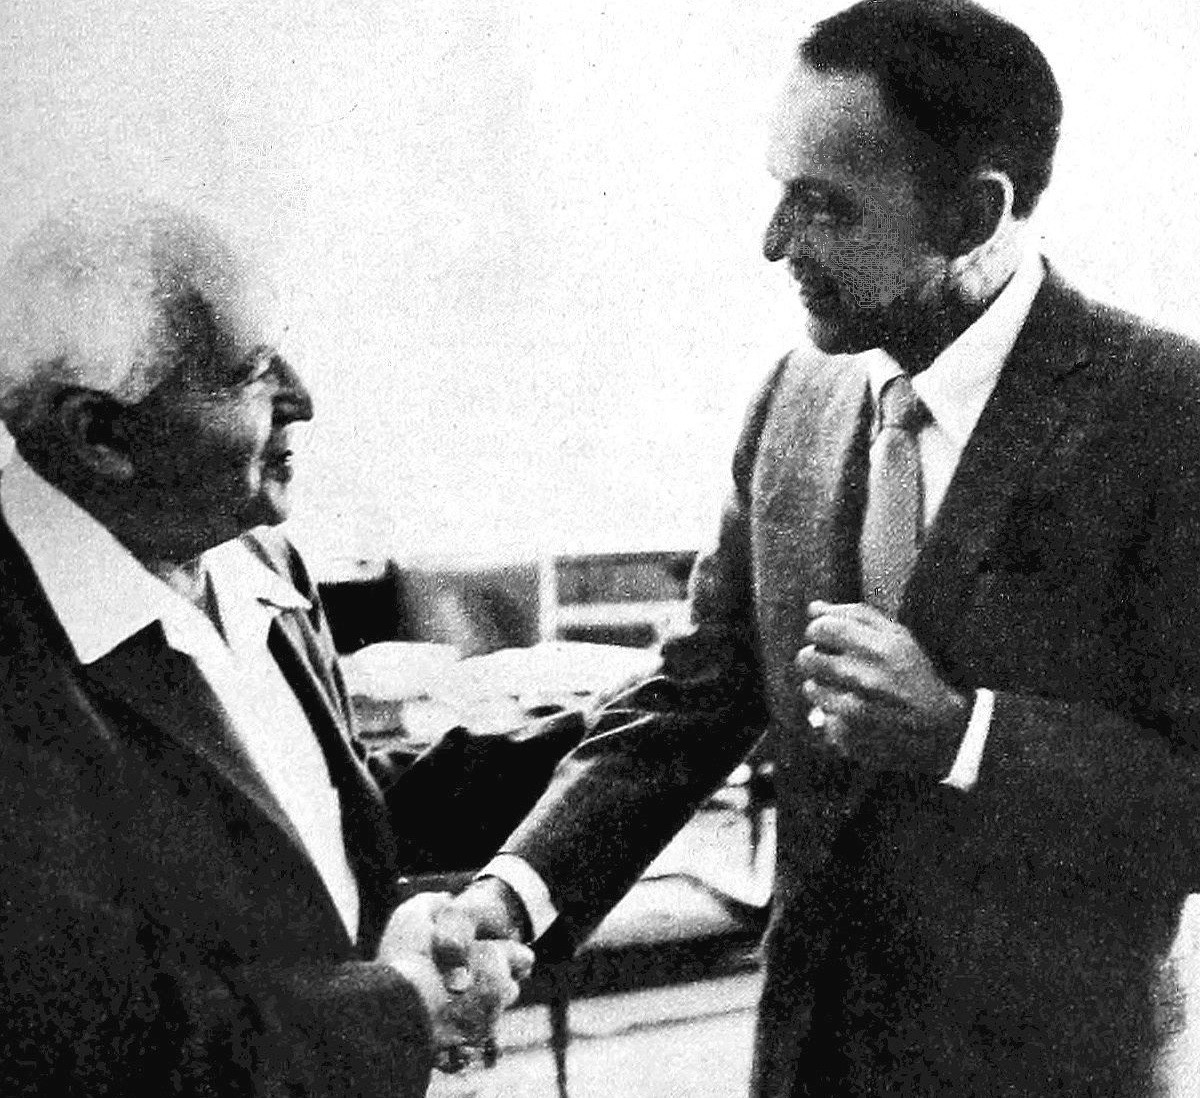 Frank Sinatra with Prime Minister David Ben-Gurion in 1962, during Sinatra’s first world tour.